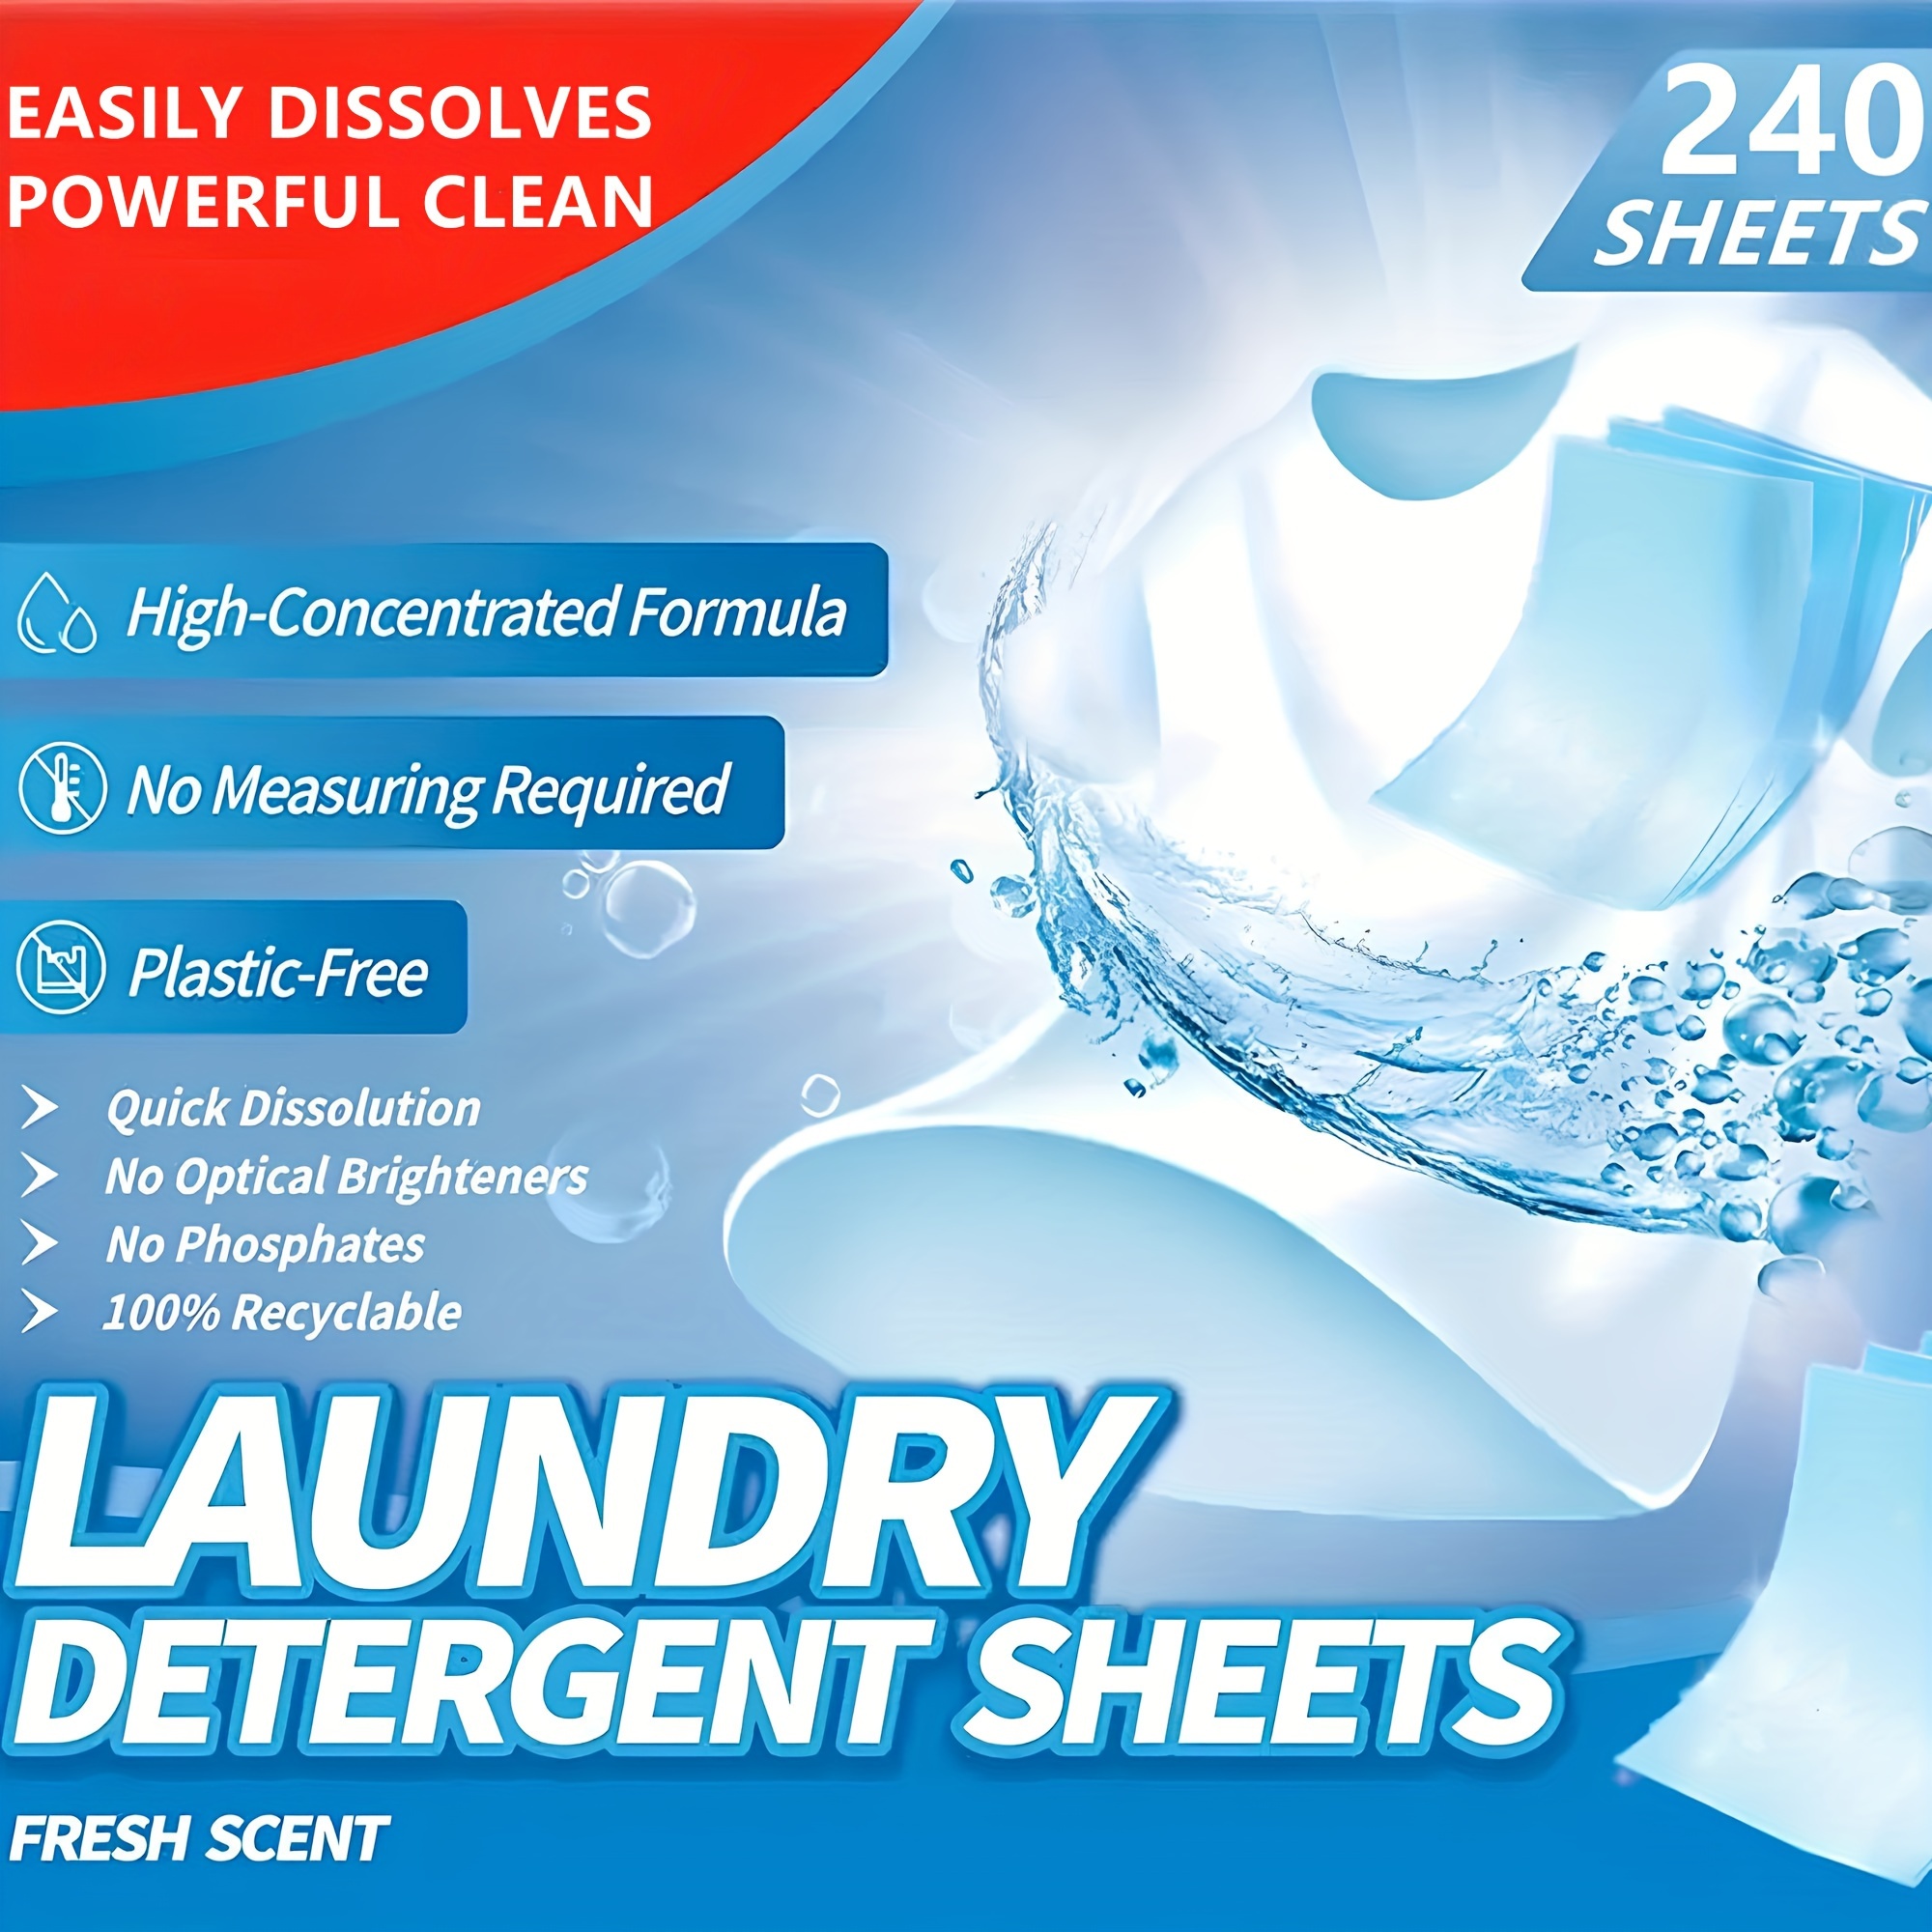 Laundry Sheets wholesale products